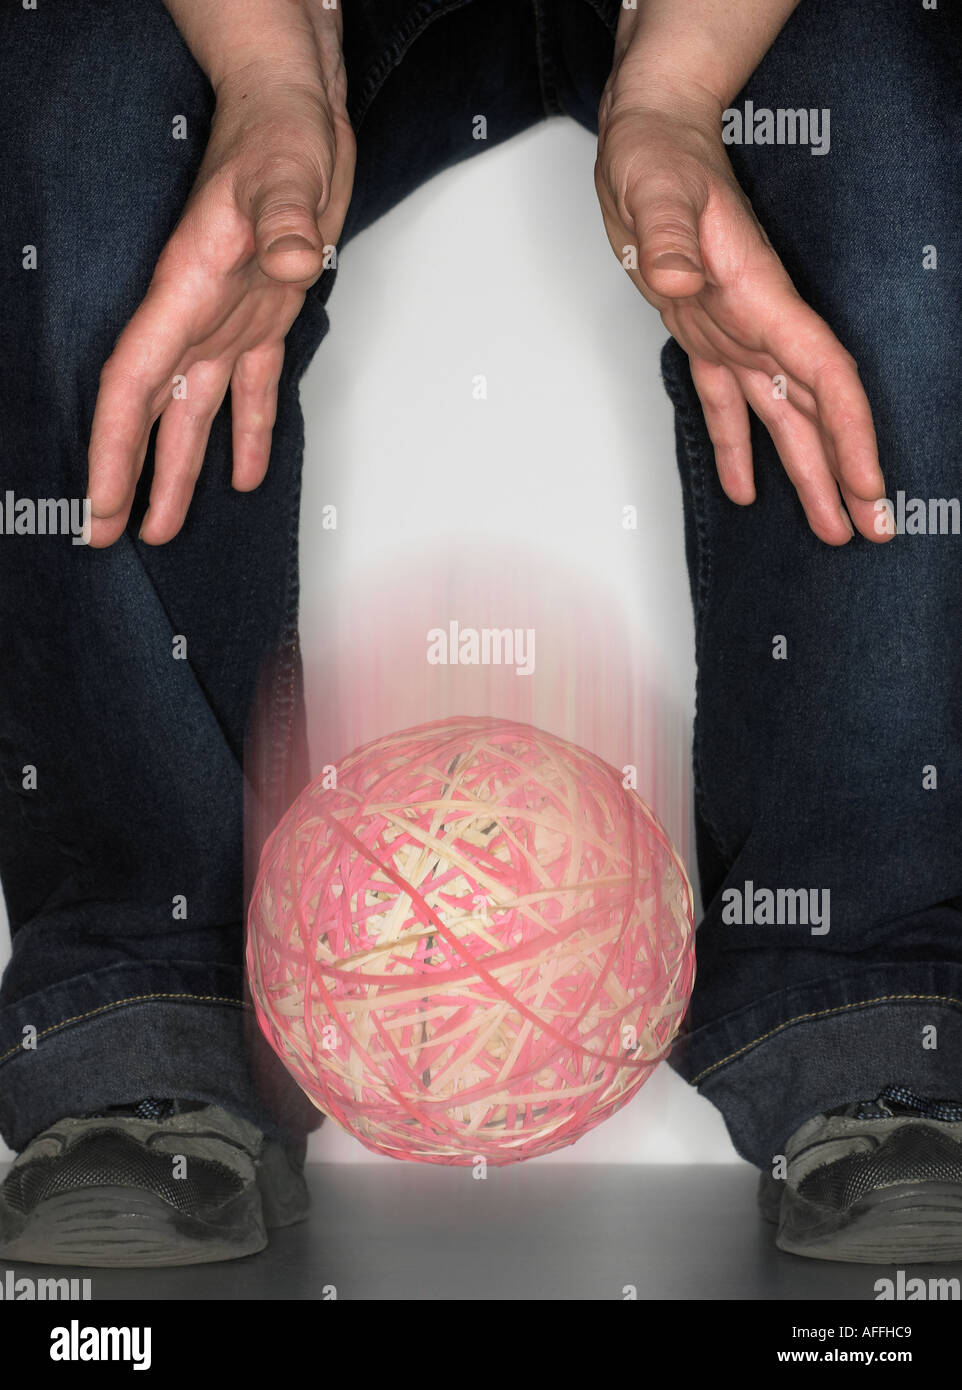 dropping a rubber band ball Stock Photo